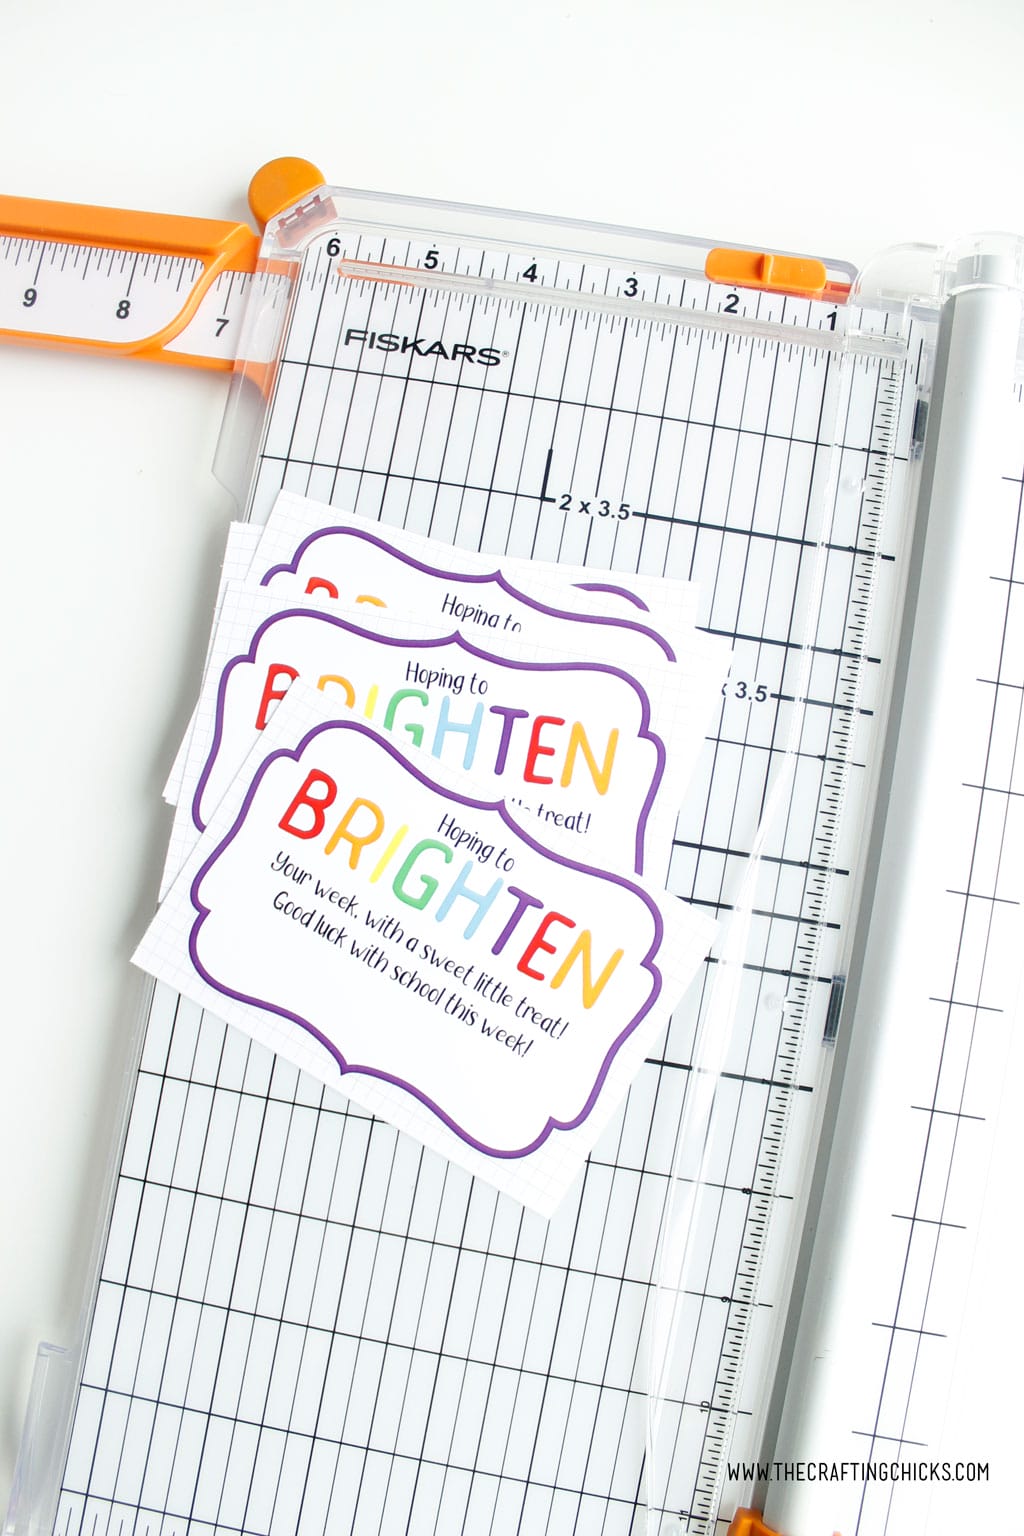 Brighten your day printable gift tags cut into squares using a paper trimmer